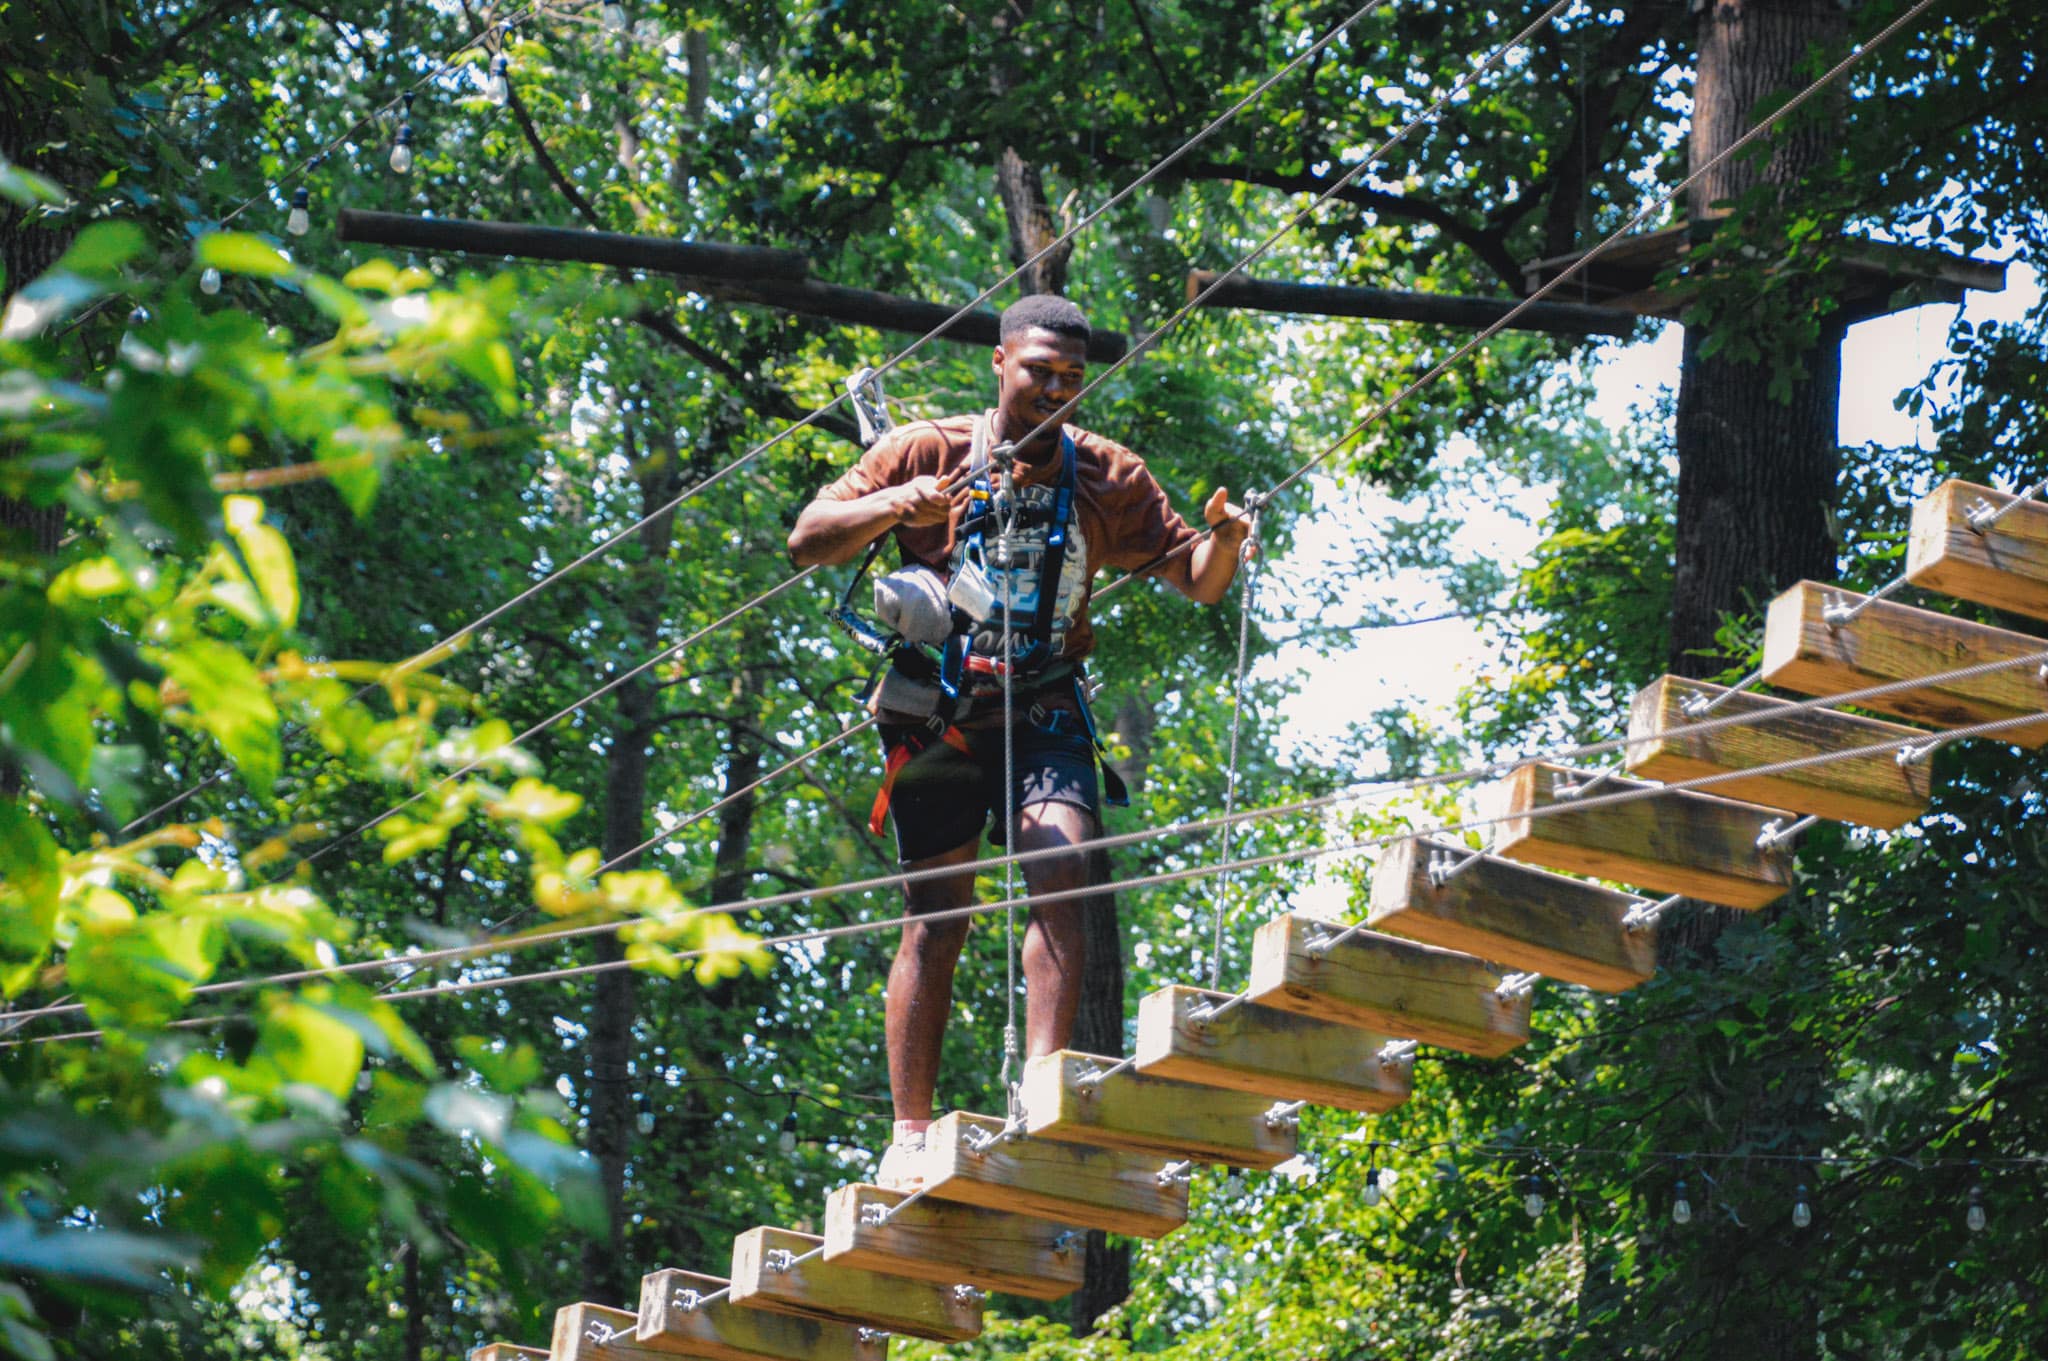 Black Male Ropes Course at Adventure Park and Sandy Spring